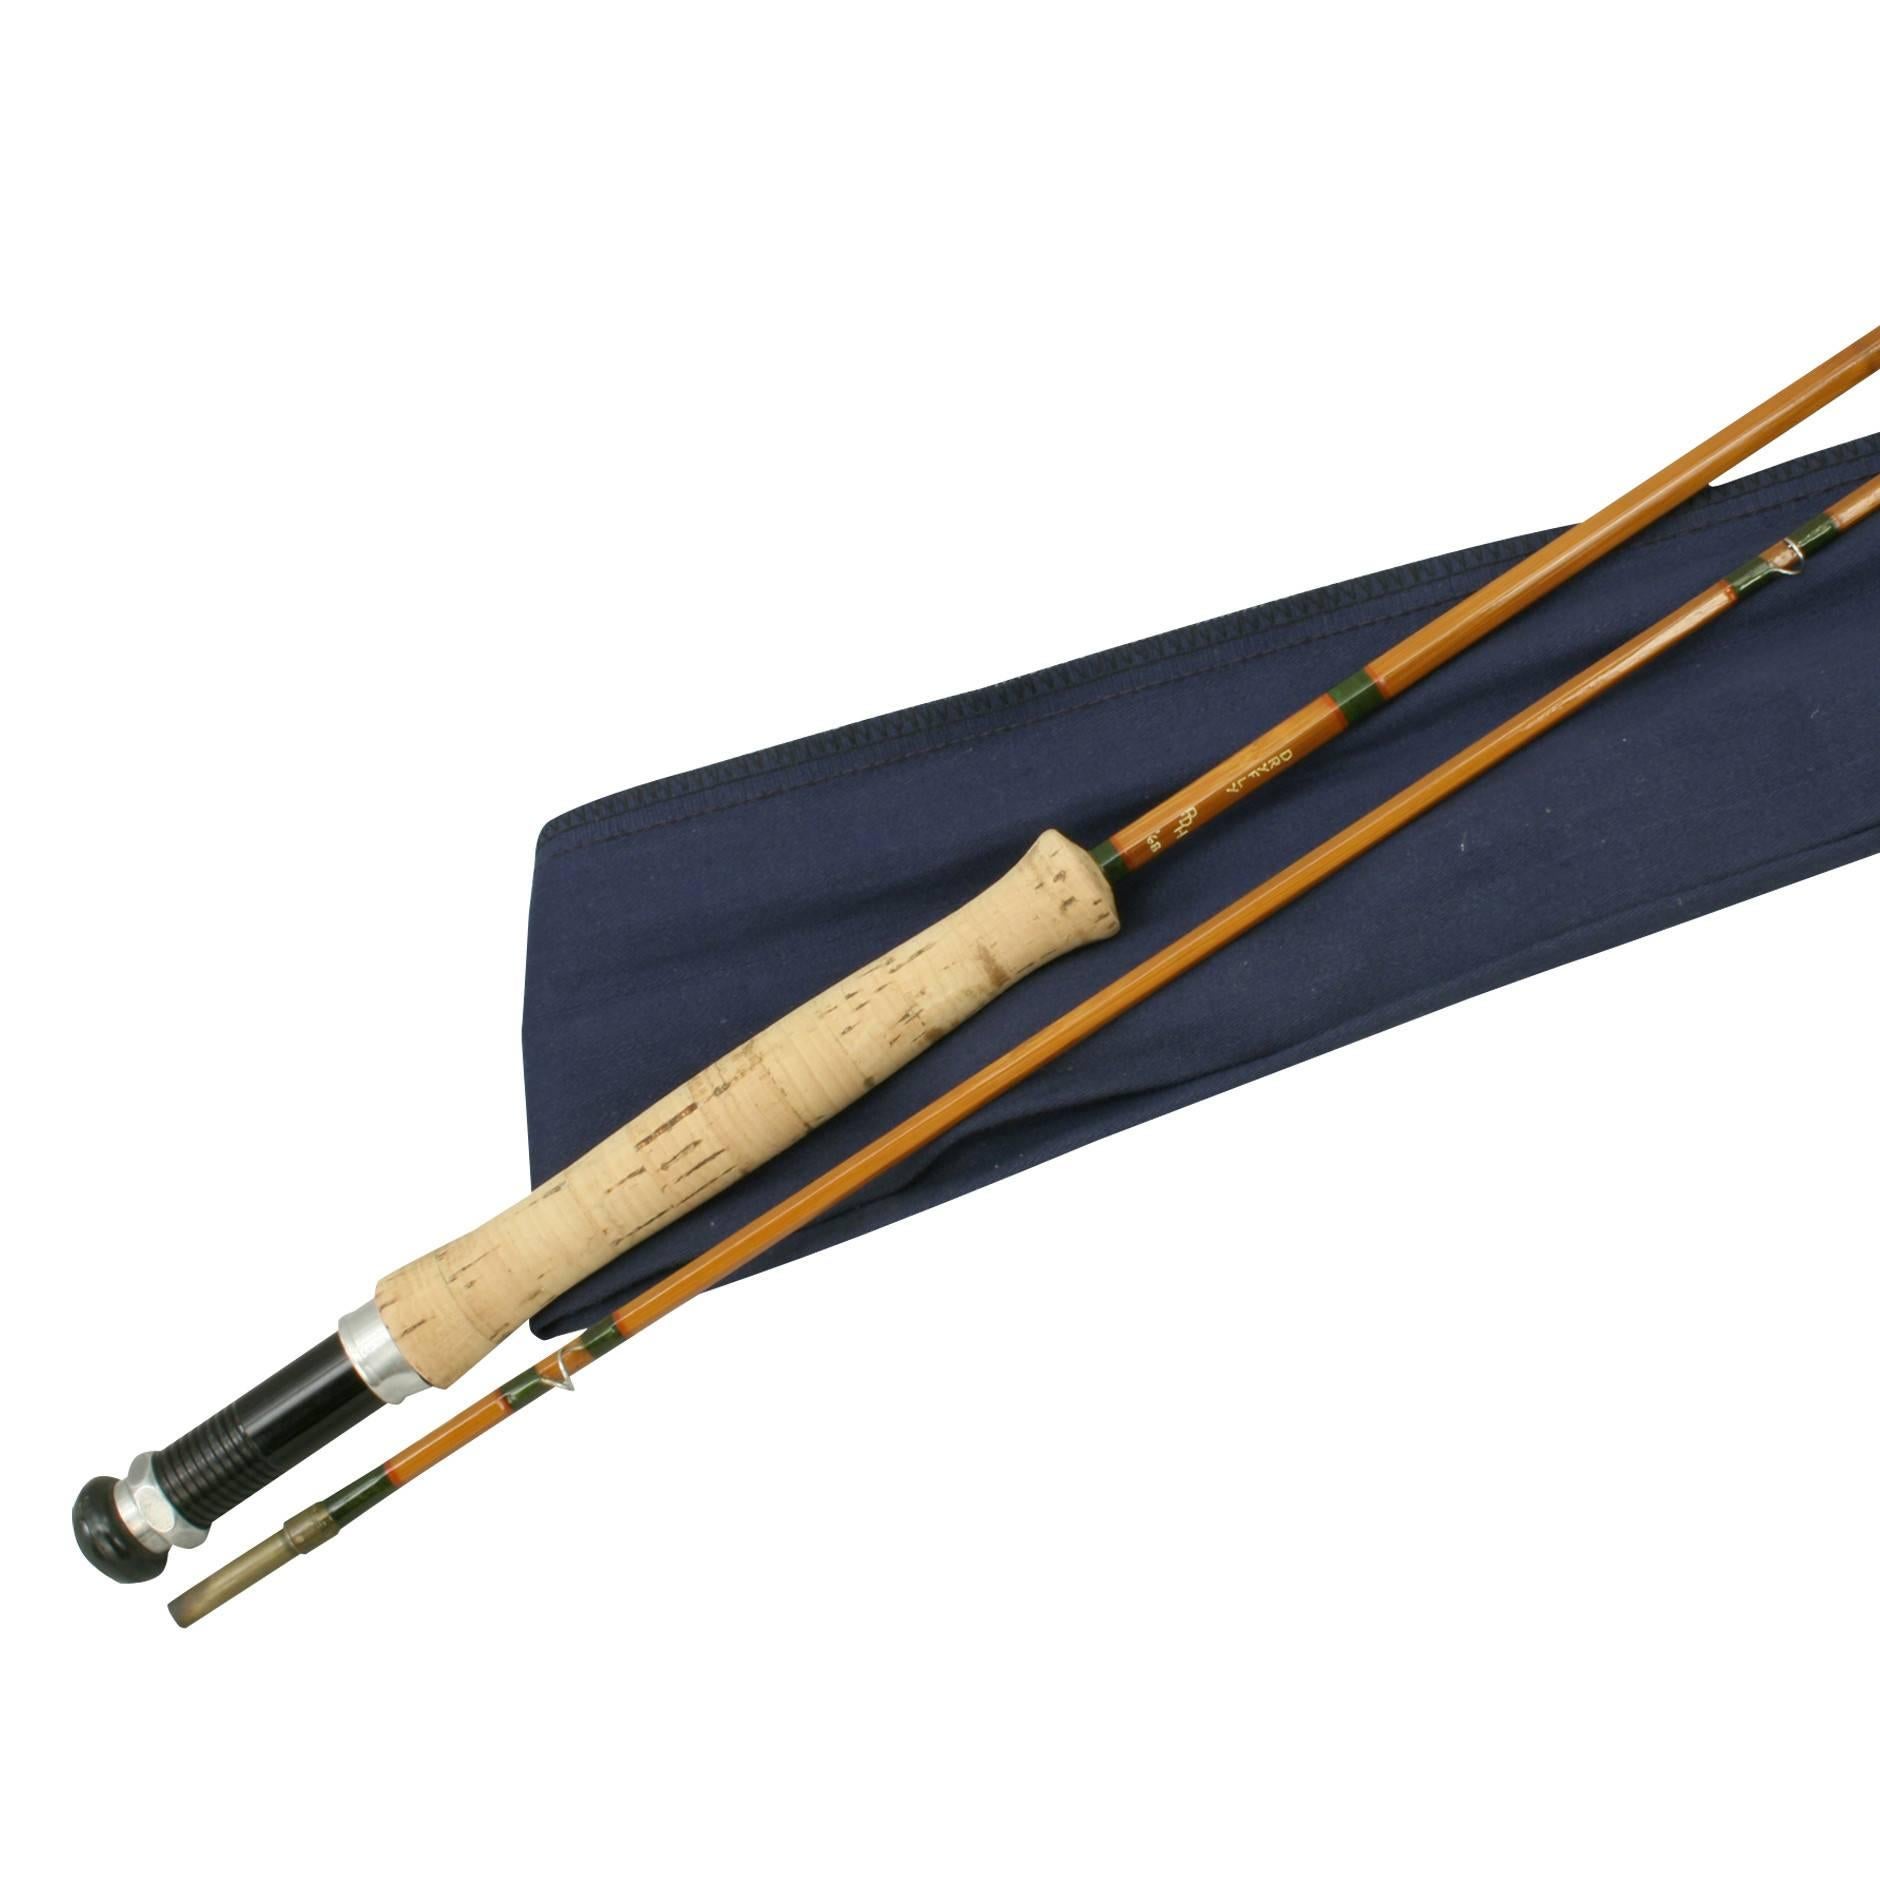 A split cane two-piece trout fly fishing rod in excellent original condition with blue canvas bag. It has the inscription on the rod, DRY FLY PDH '68. A stunning 8.7 foot; long rod with suction joint, rubber butt, alloy screw reel fitting, smooth